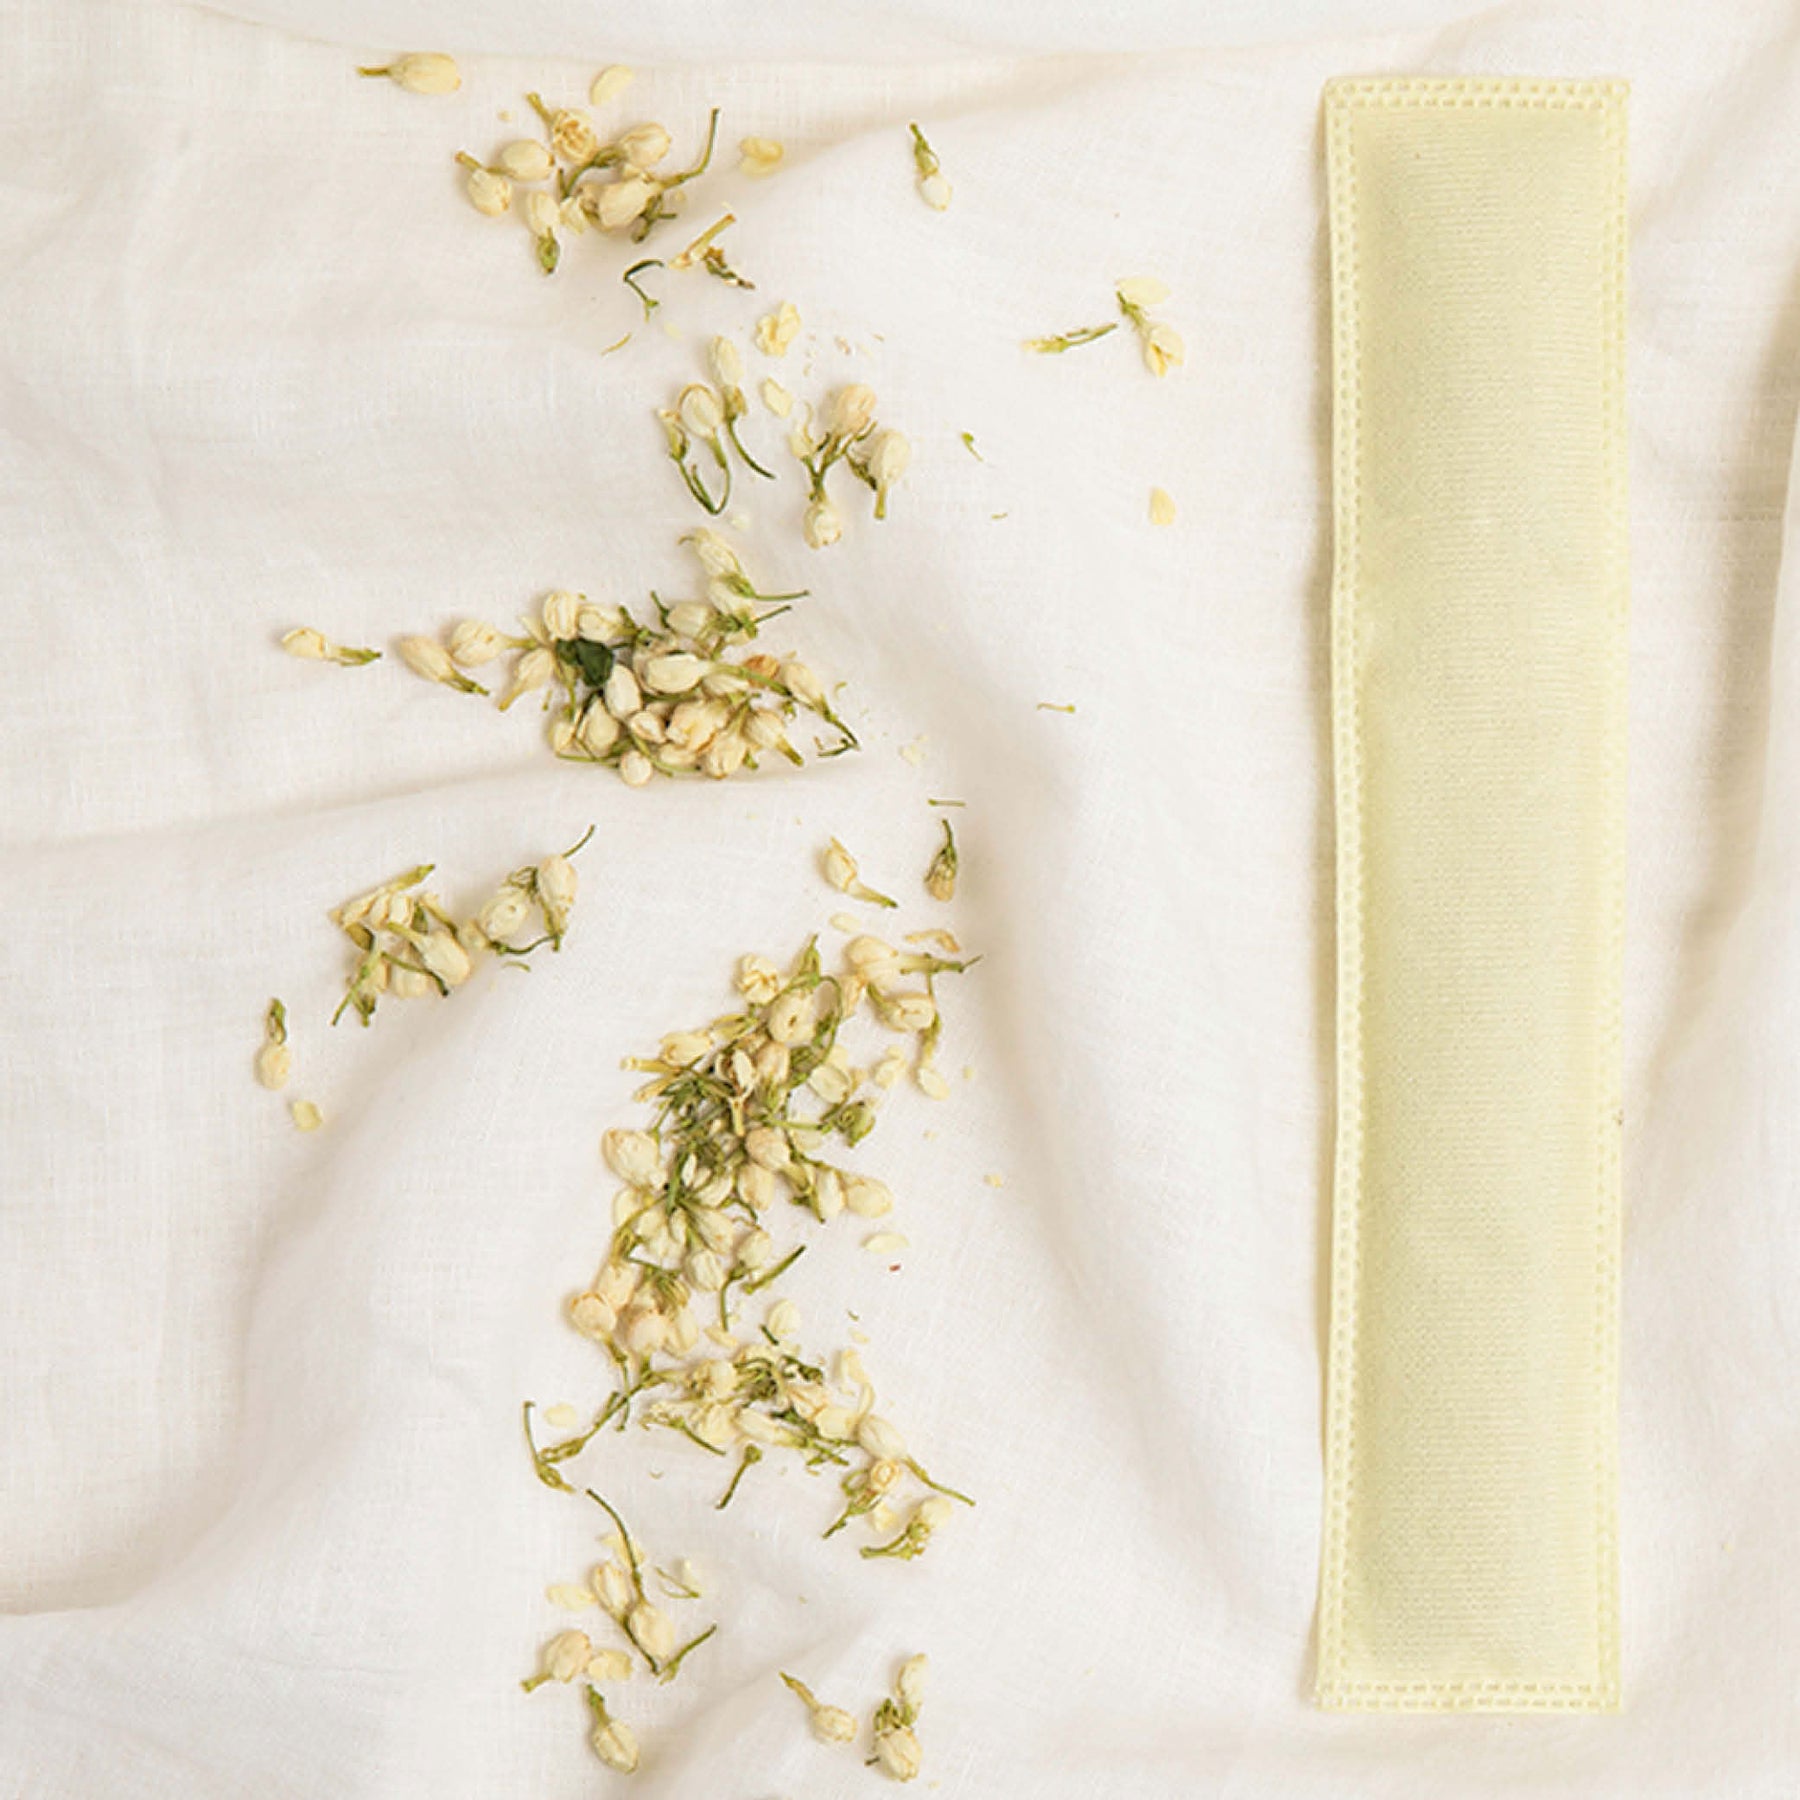 Image of a yellow Aromatherapy sachet with bits of jasmine flowers to the left of it on an off-white fabric background